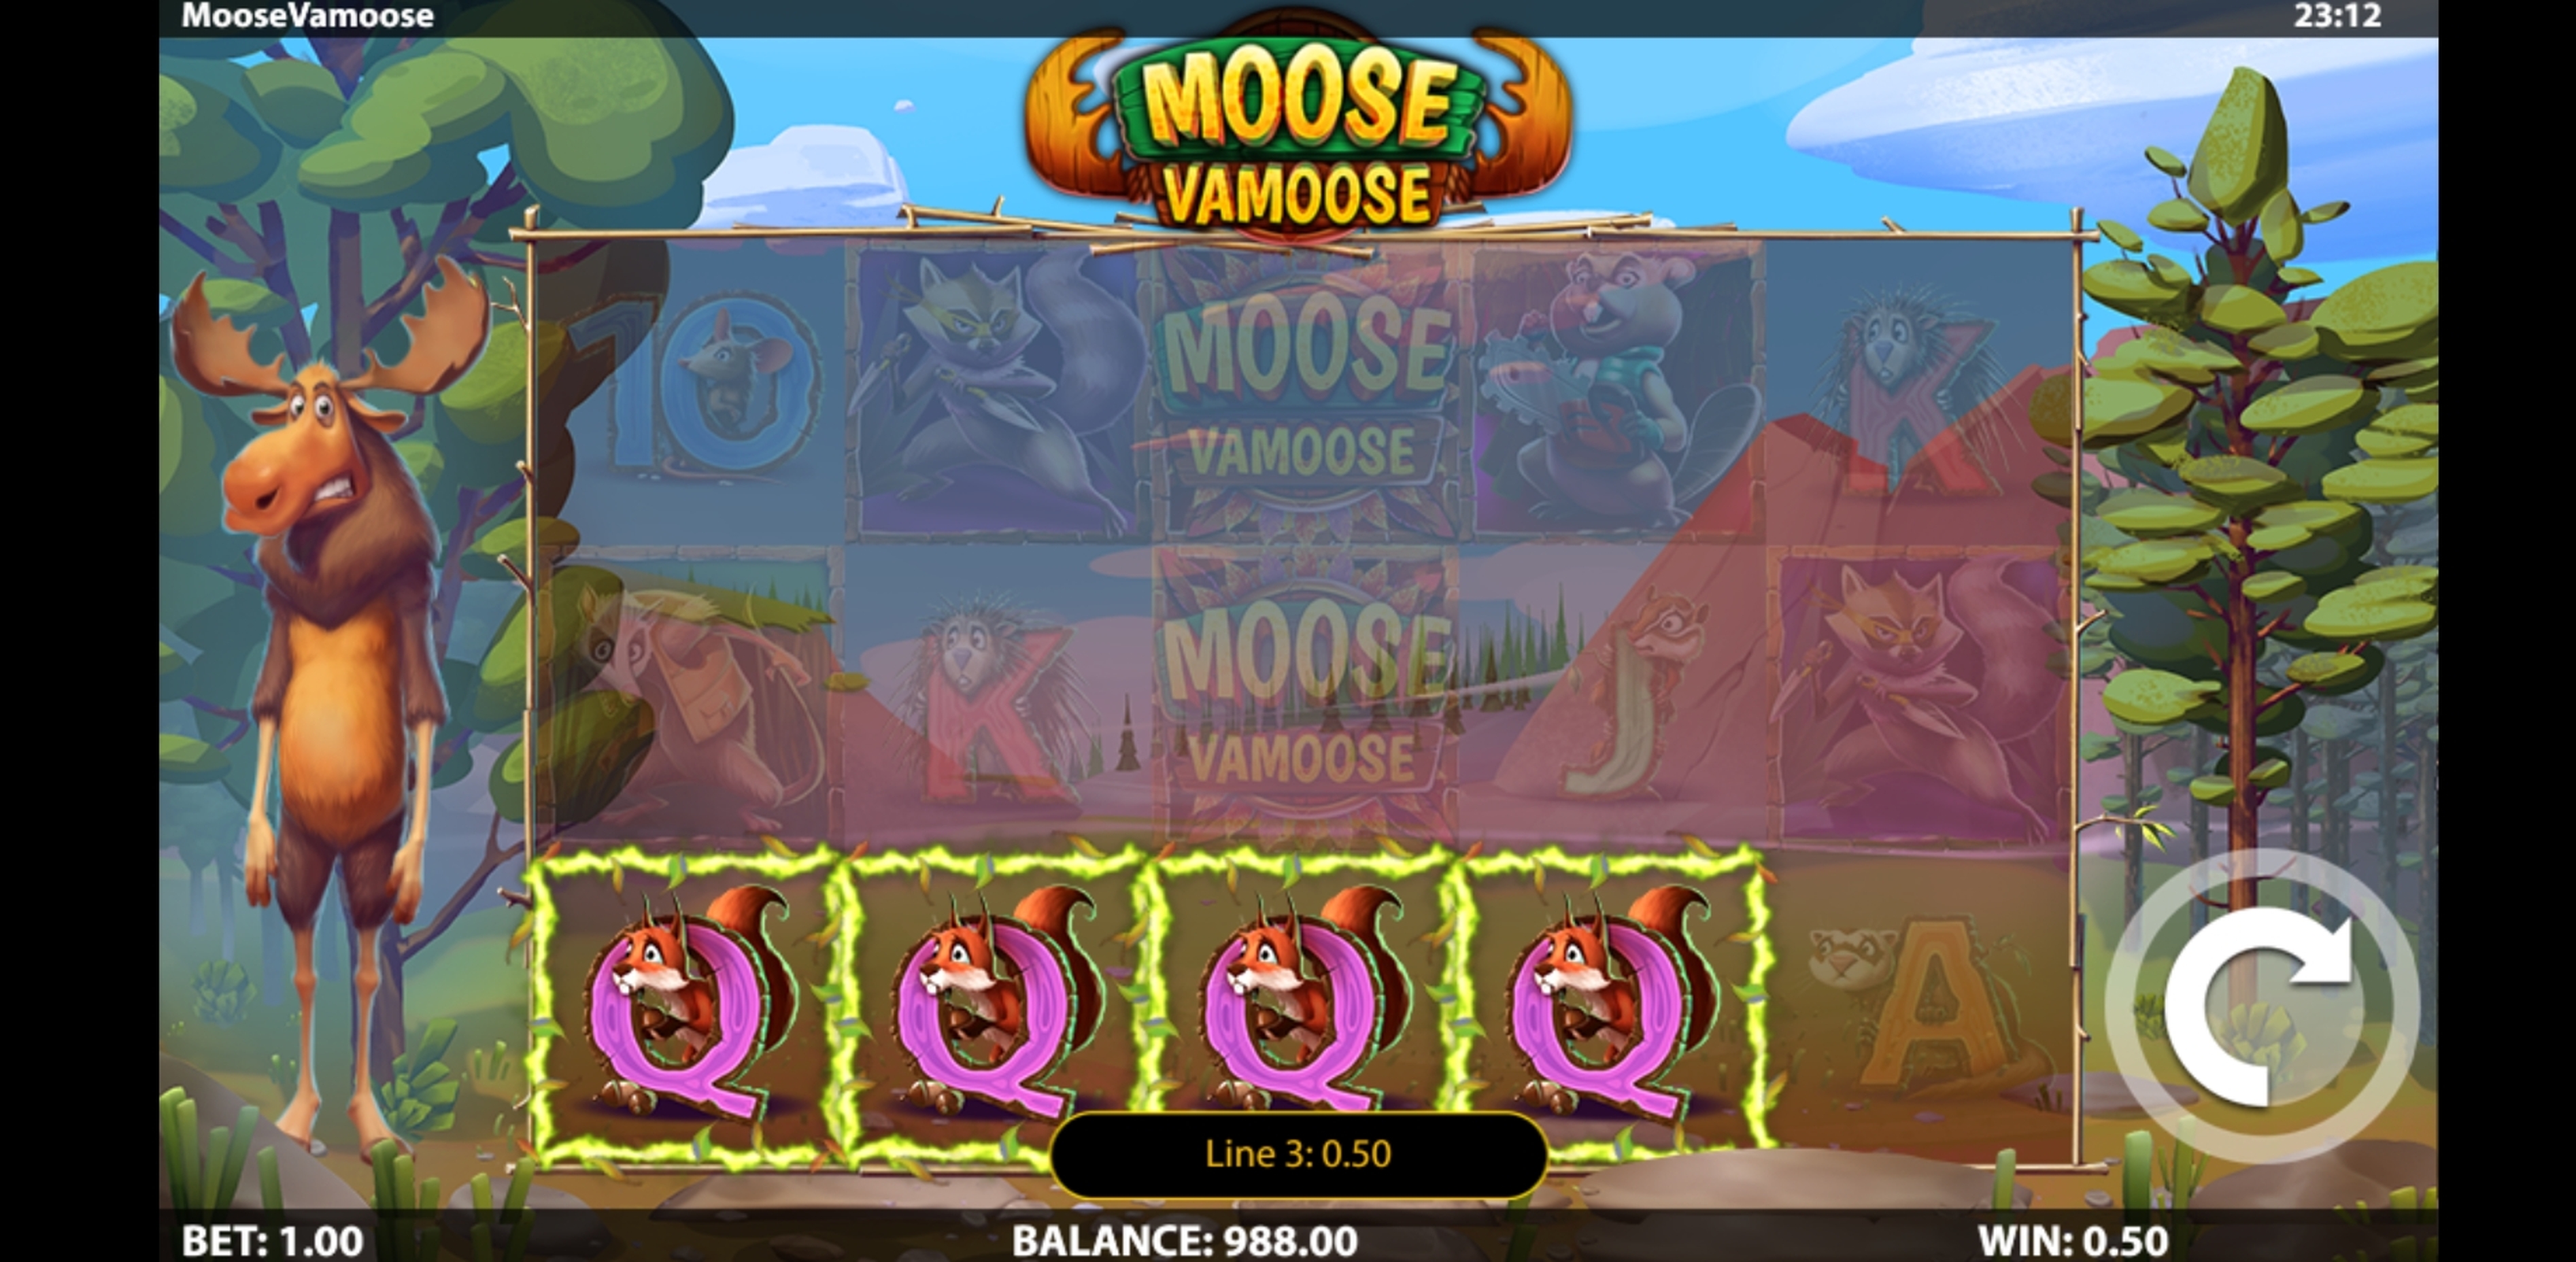 Win Money in Moose Vamoose Free Slot Game by HungryBear